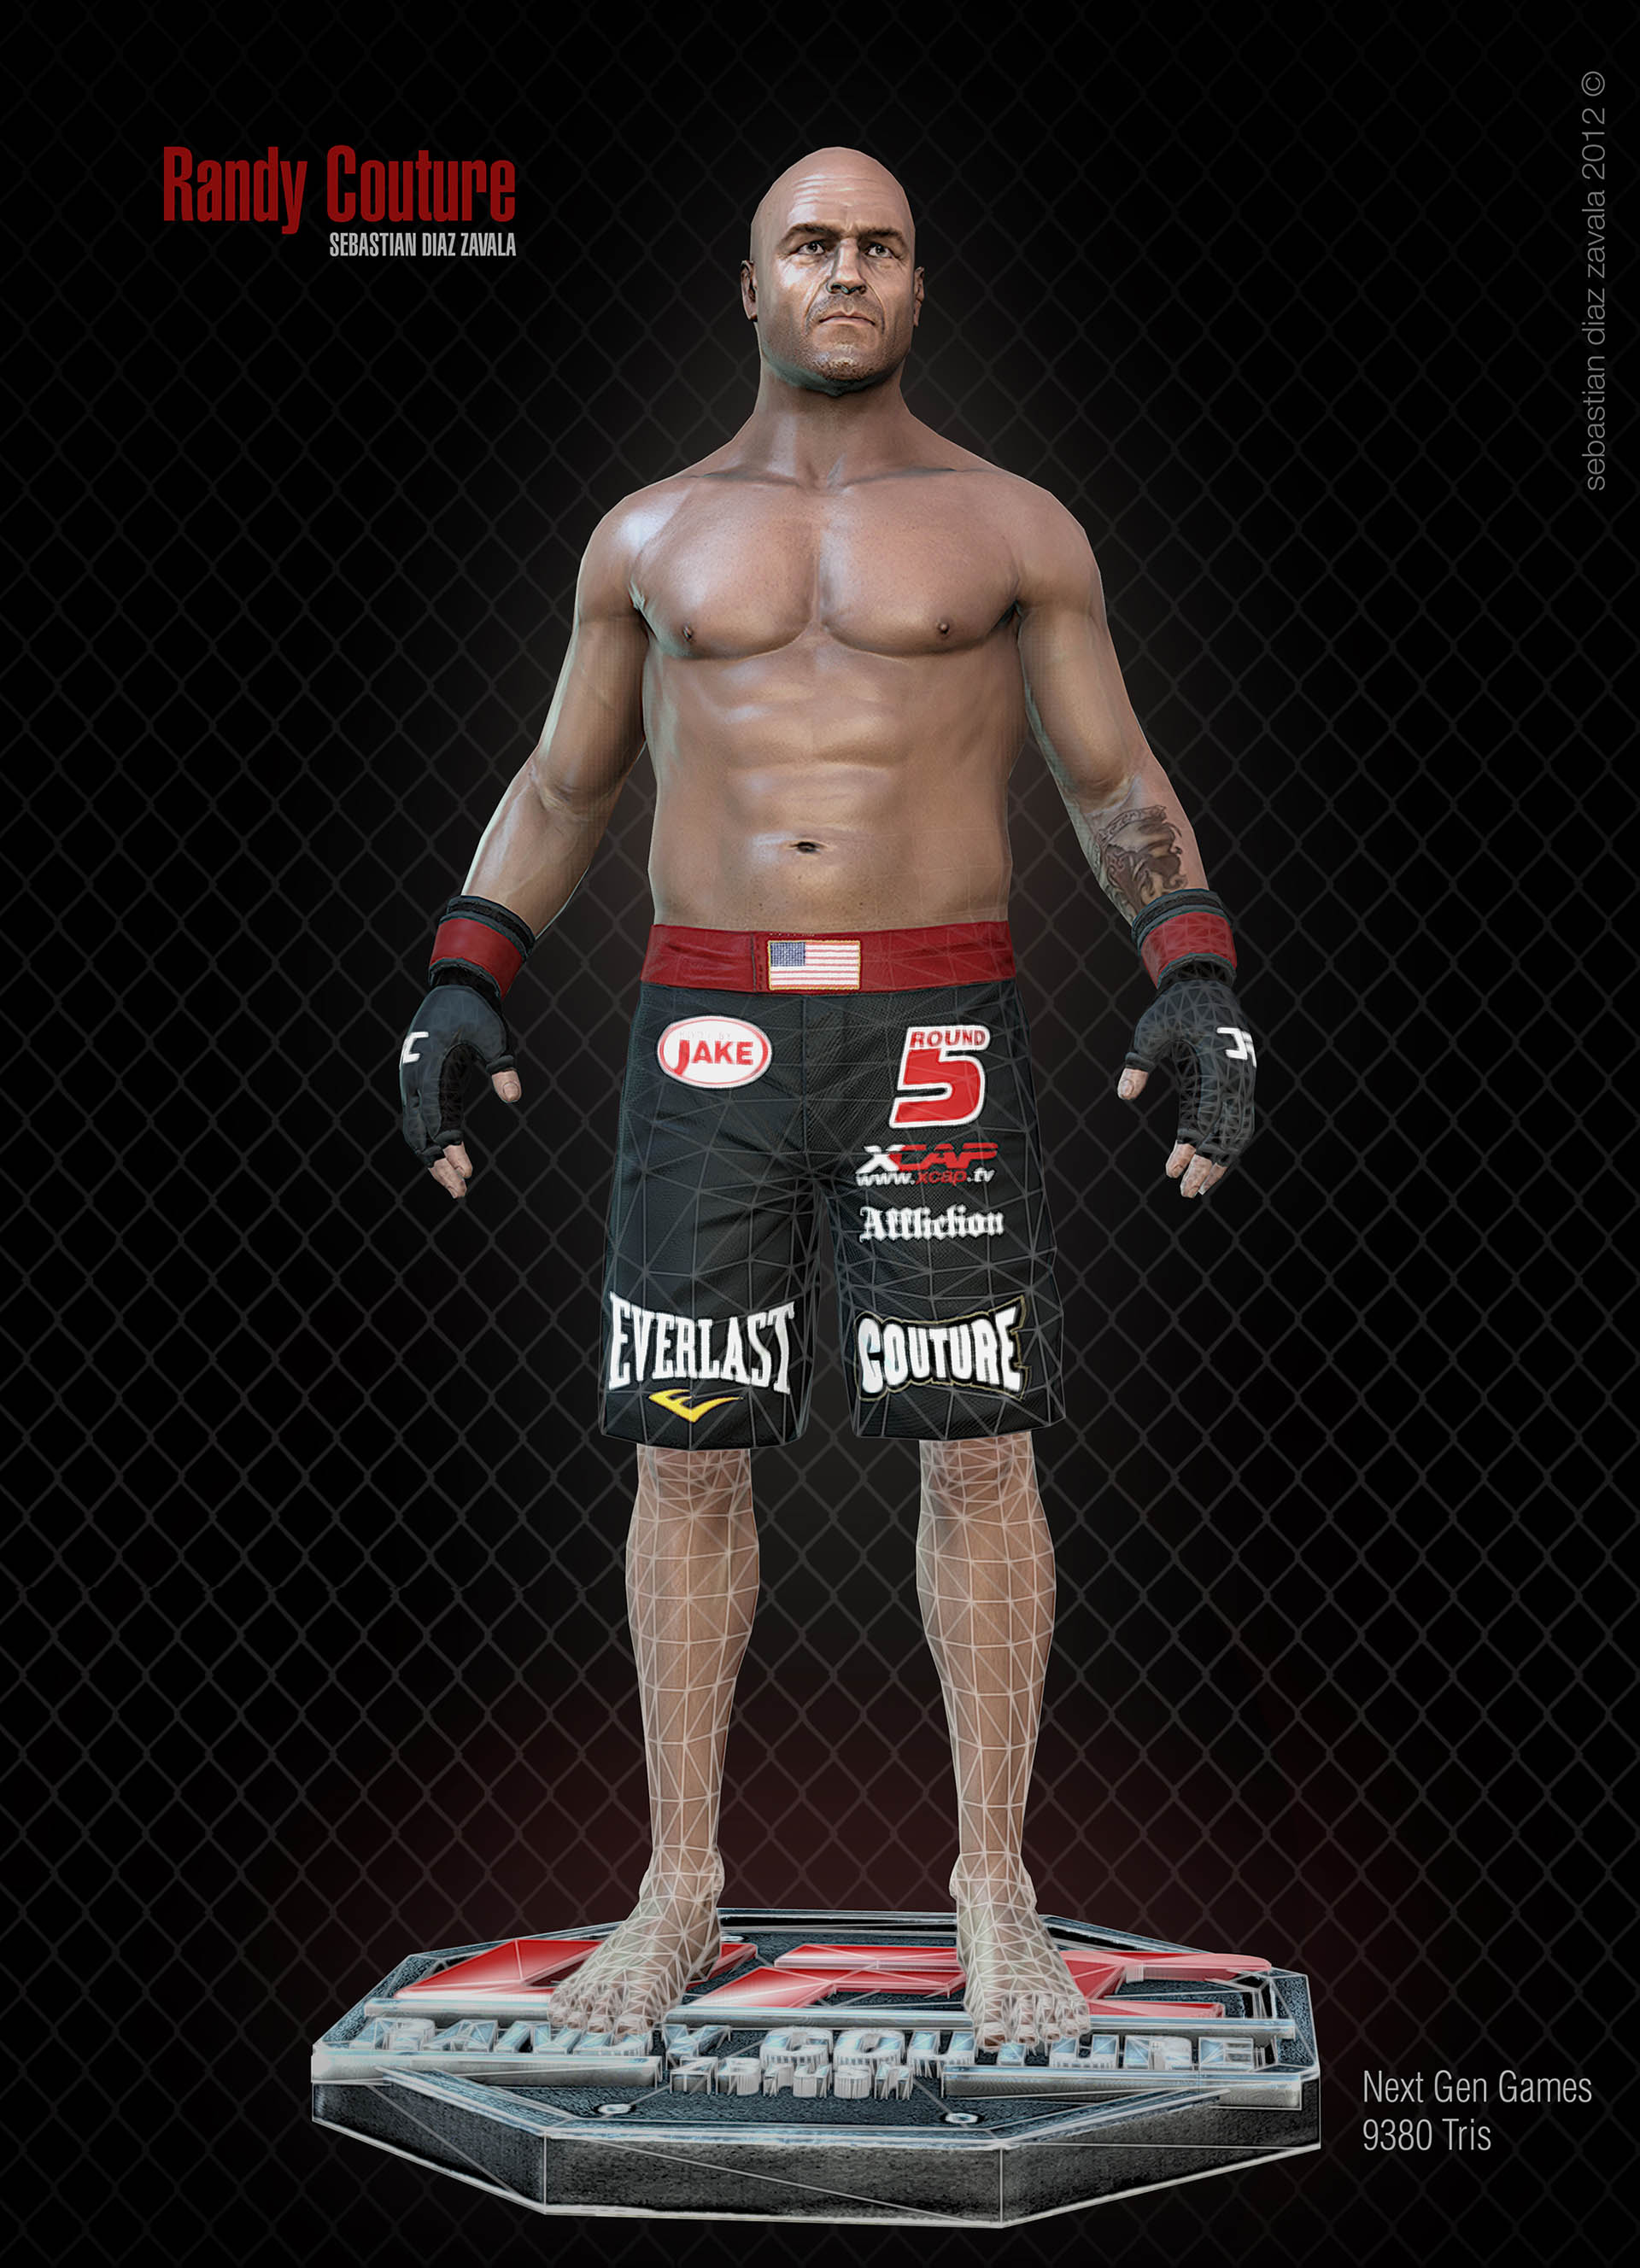 UFC - Randy Couture Next Gen Games - ZBrushCentral